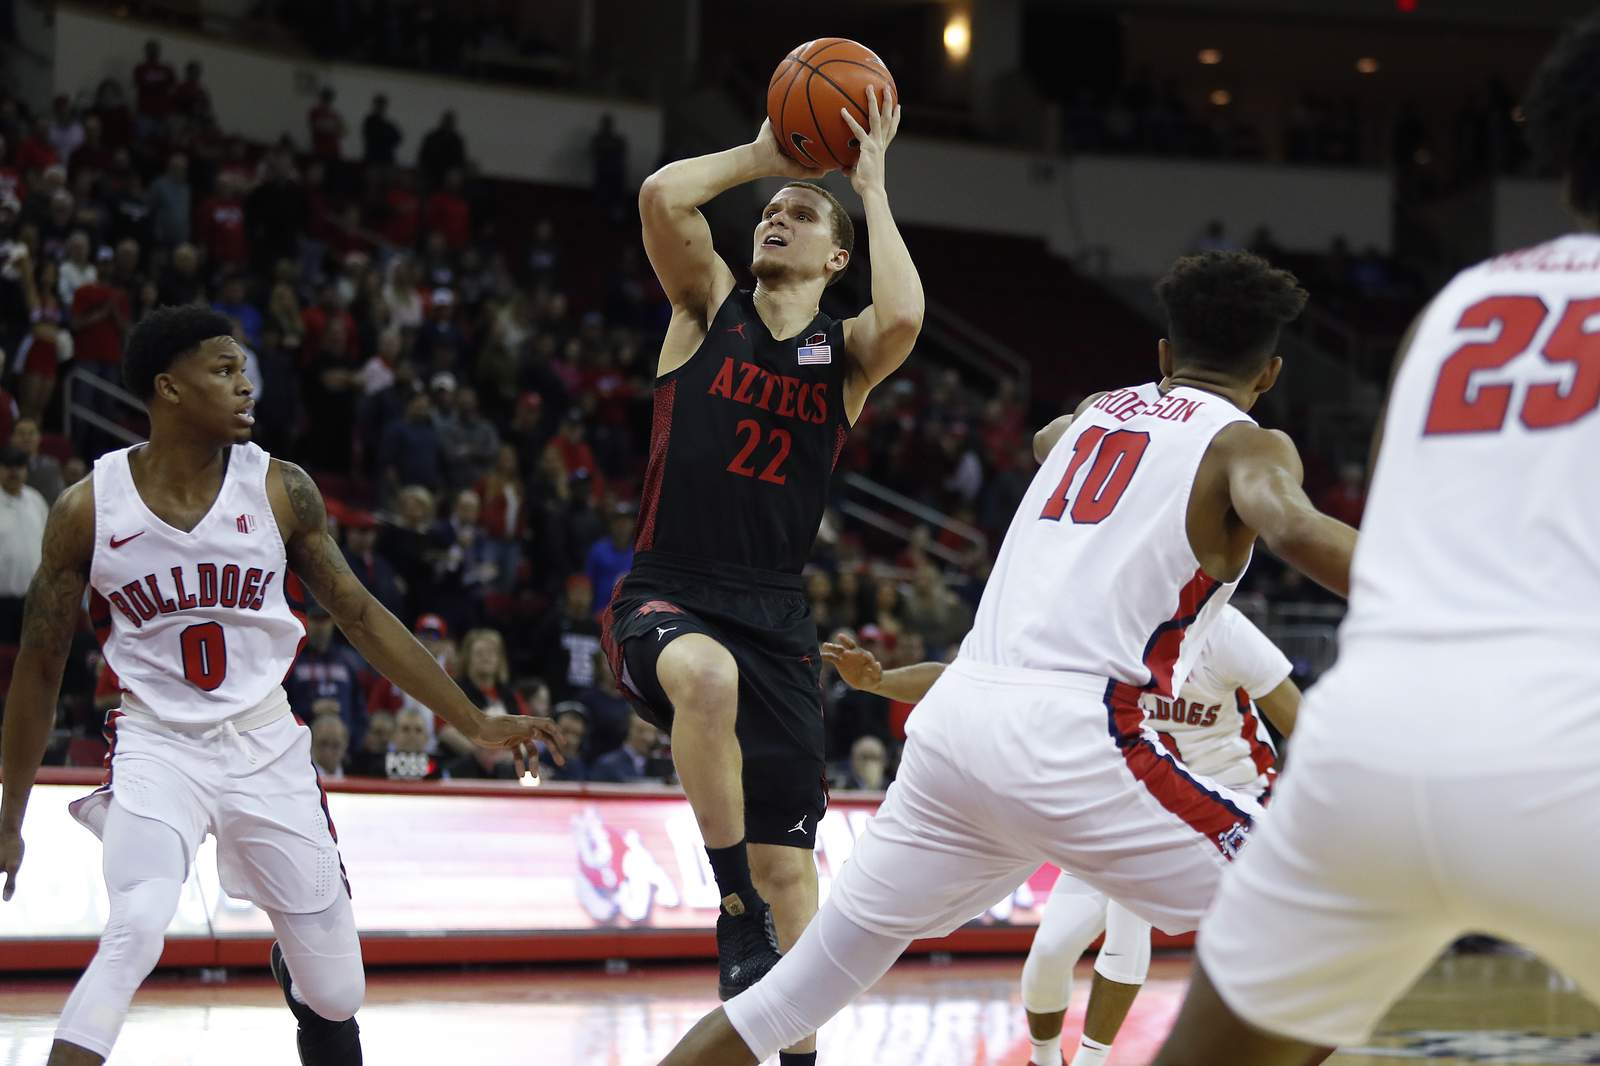 Flynn, Wetzell lead No. 7 San Diego State past Fresno State